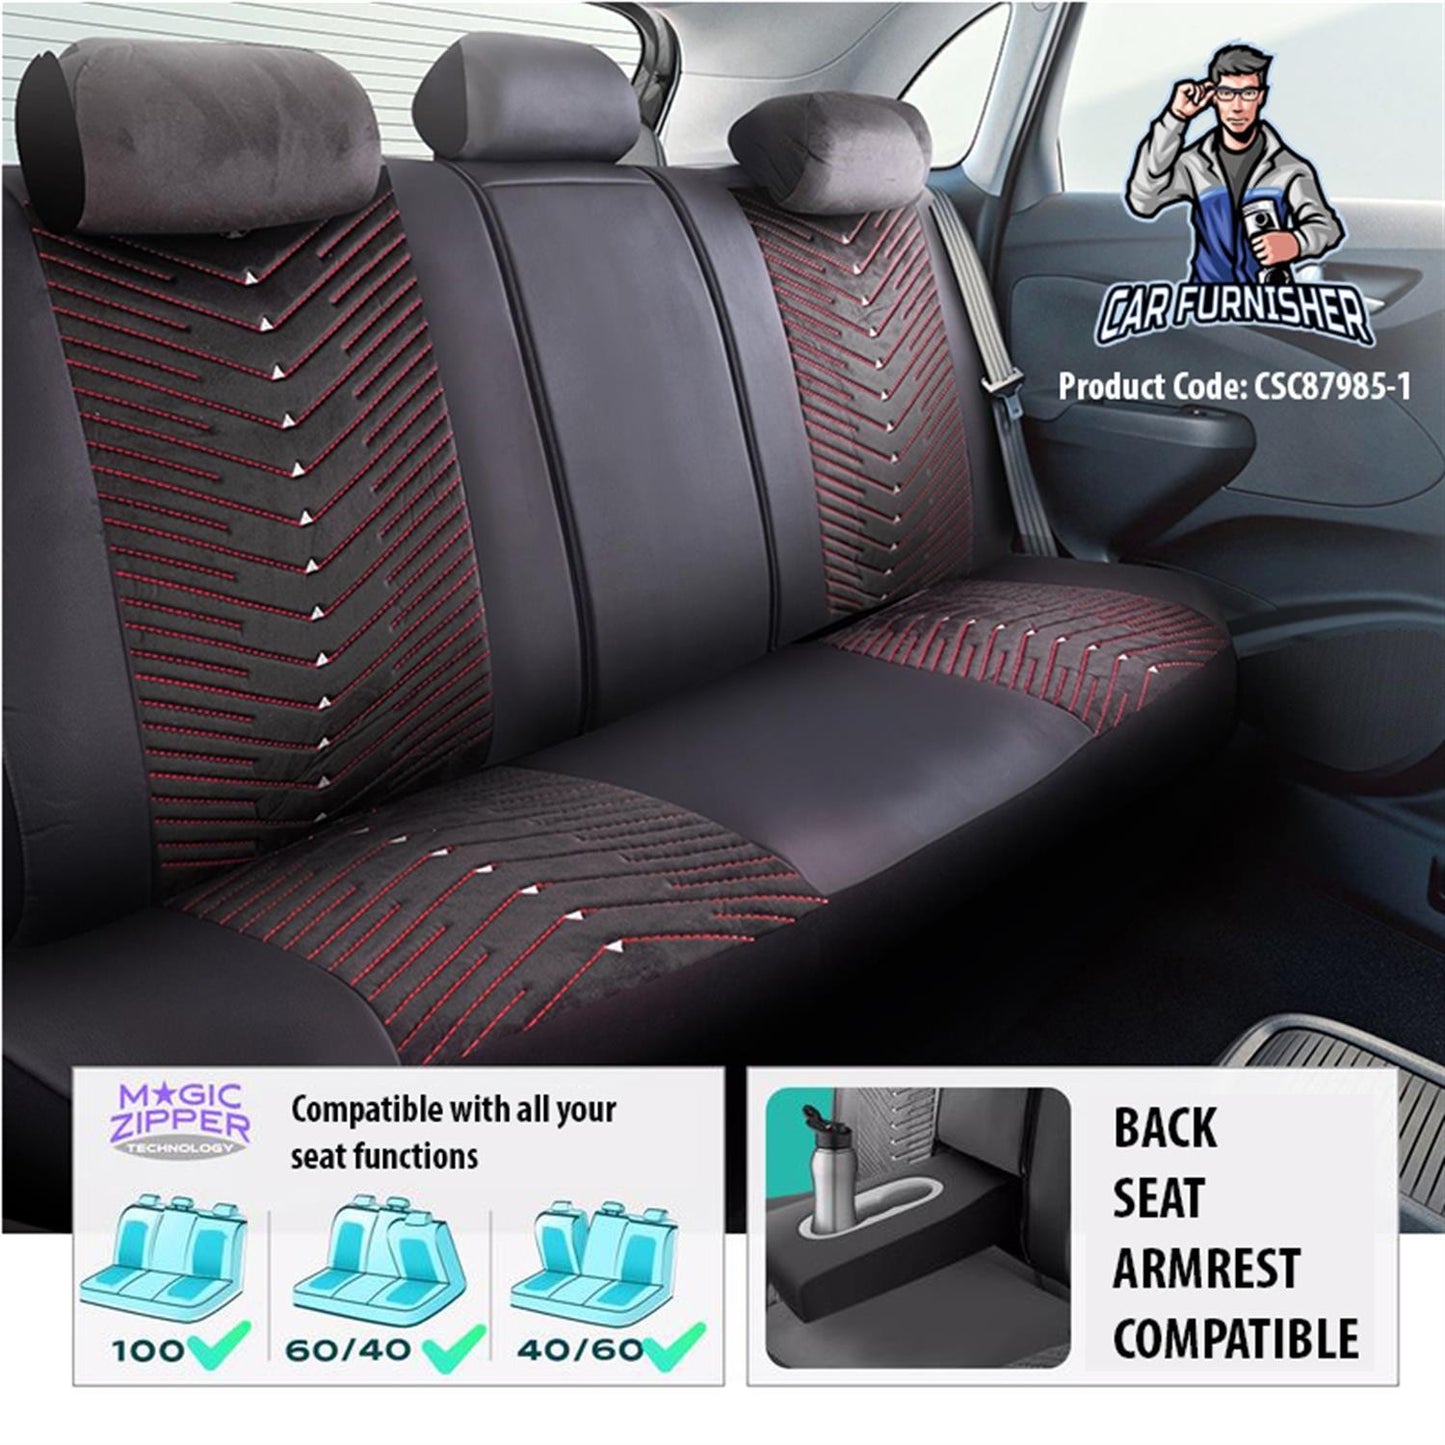 Luxury Car Seat Cover Set (7 Colors) | Dubai Series Red Leather & Fabric